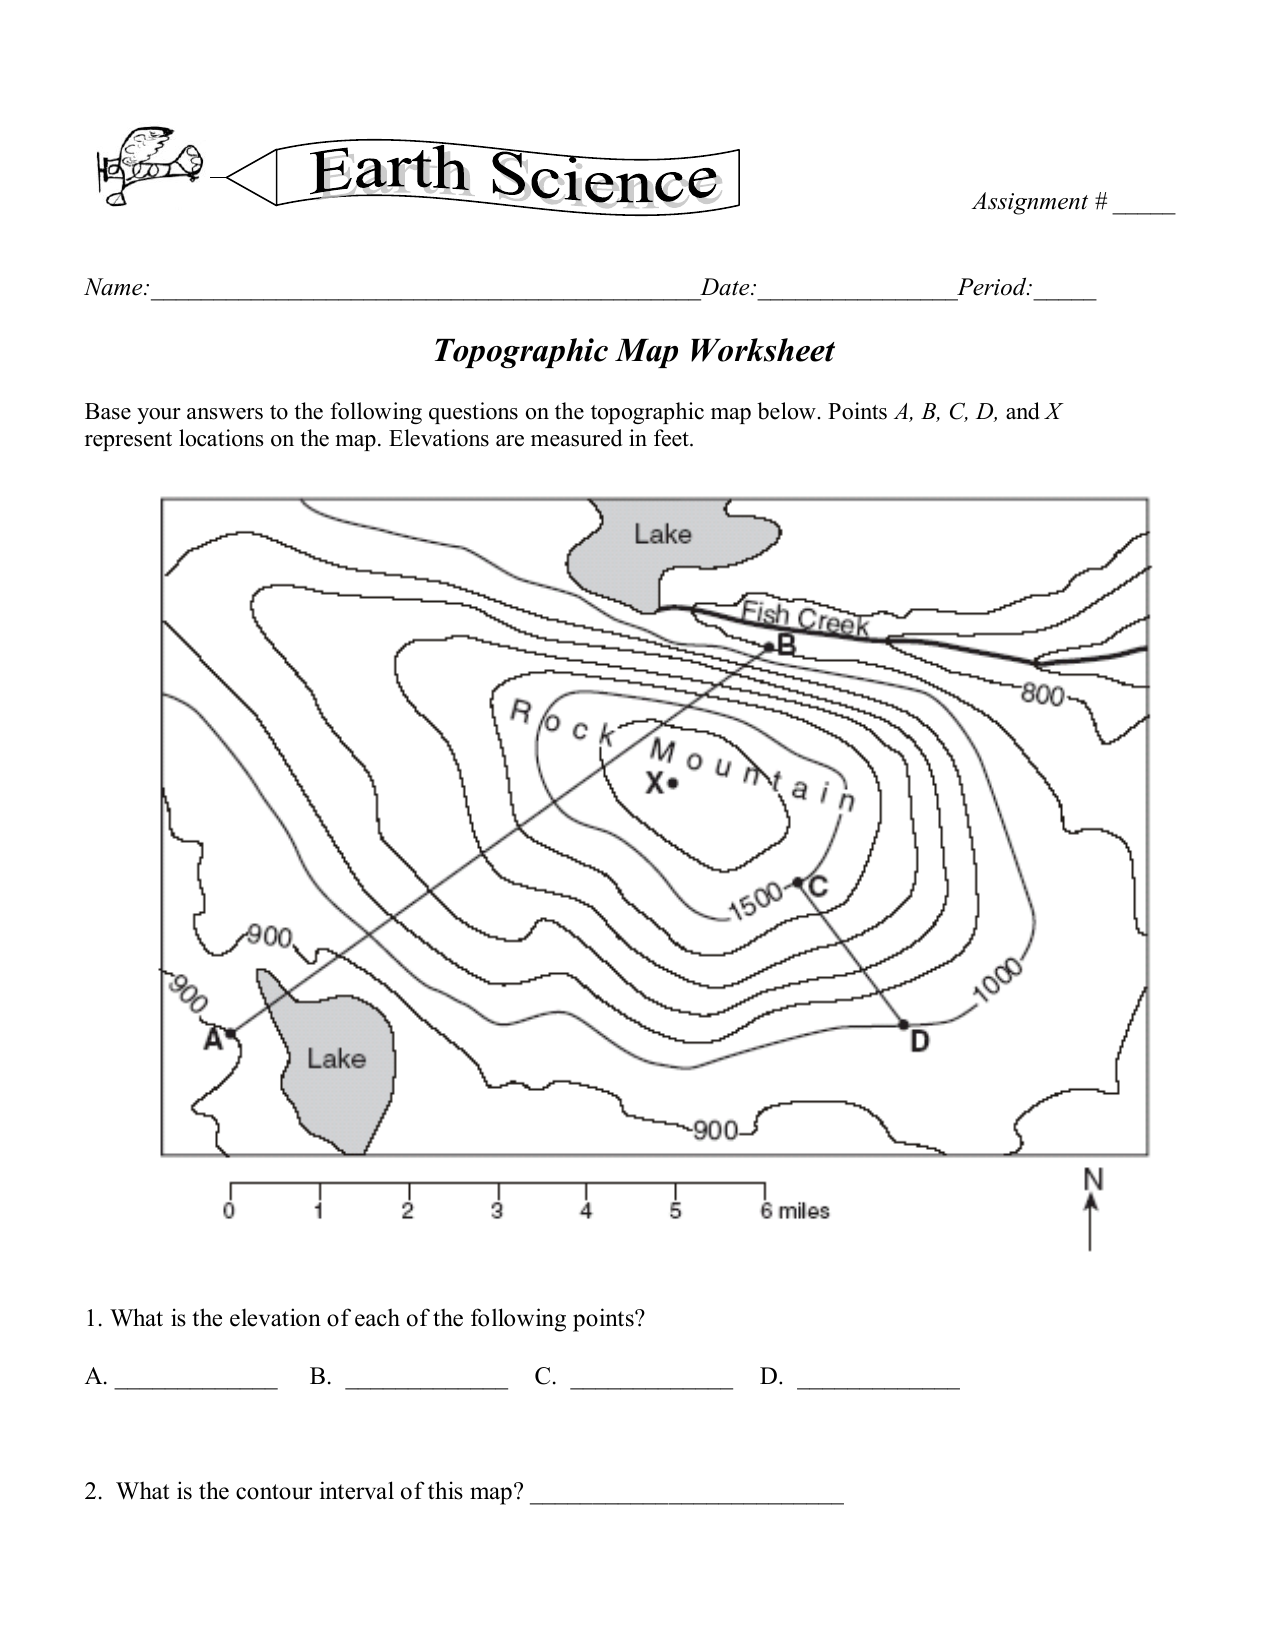 Topo Map Worksheets Within Topographic Map Worksheet Answer Key